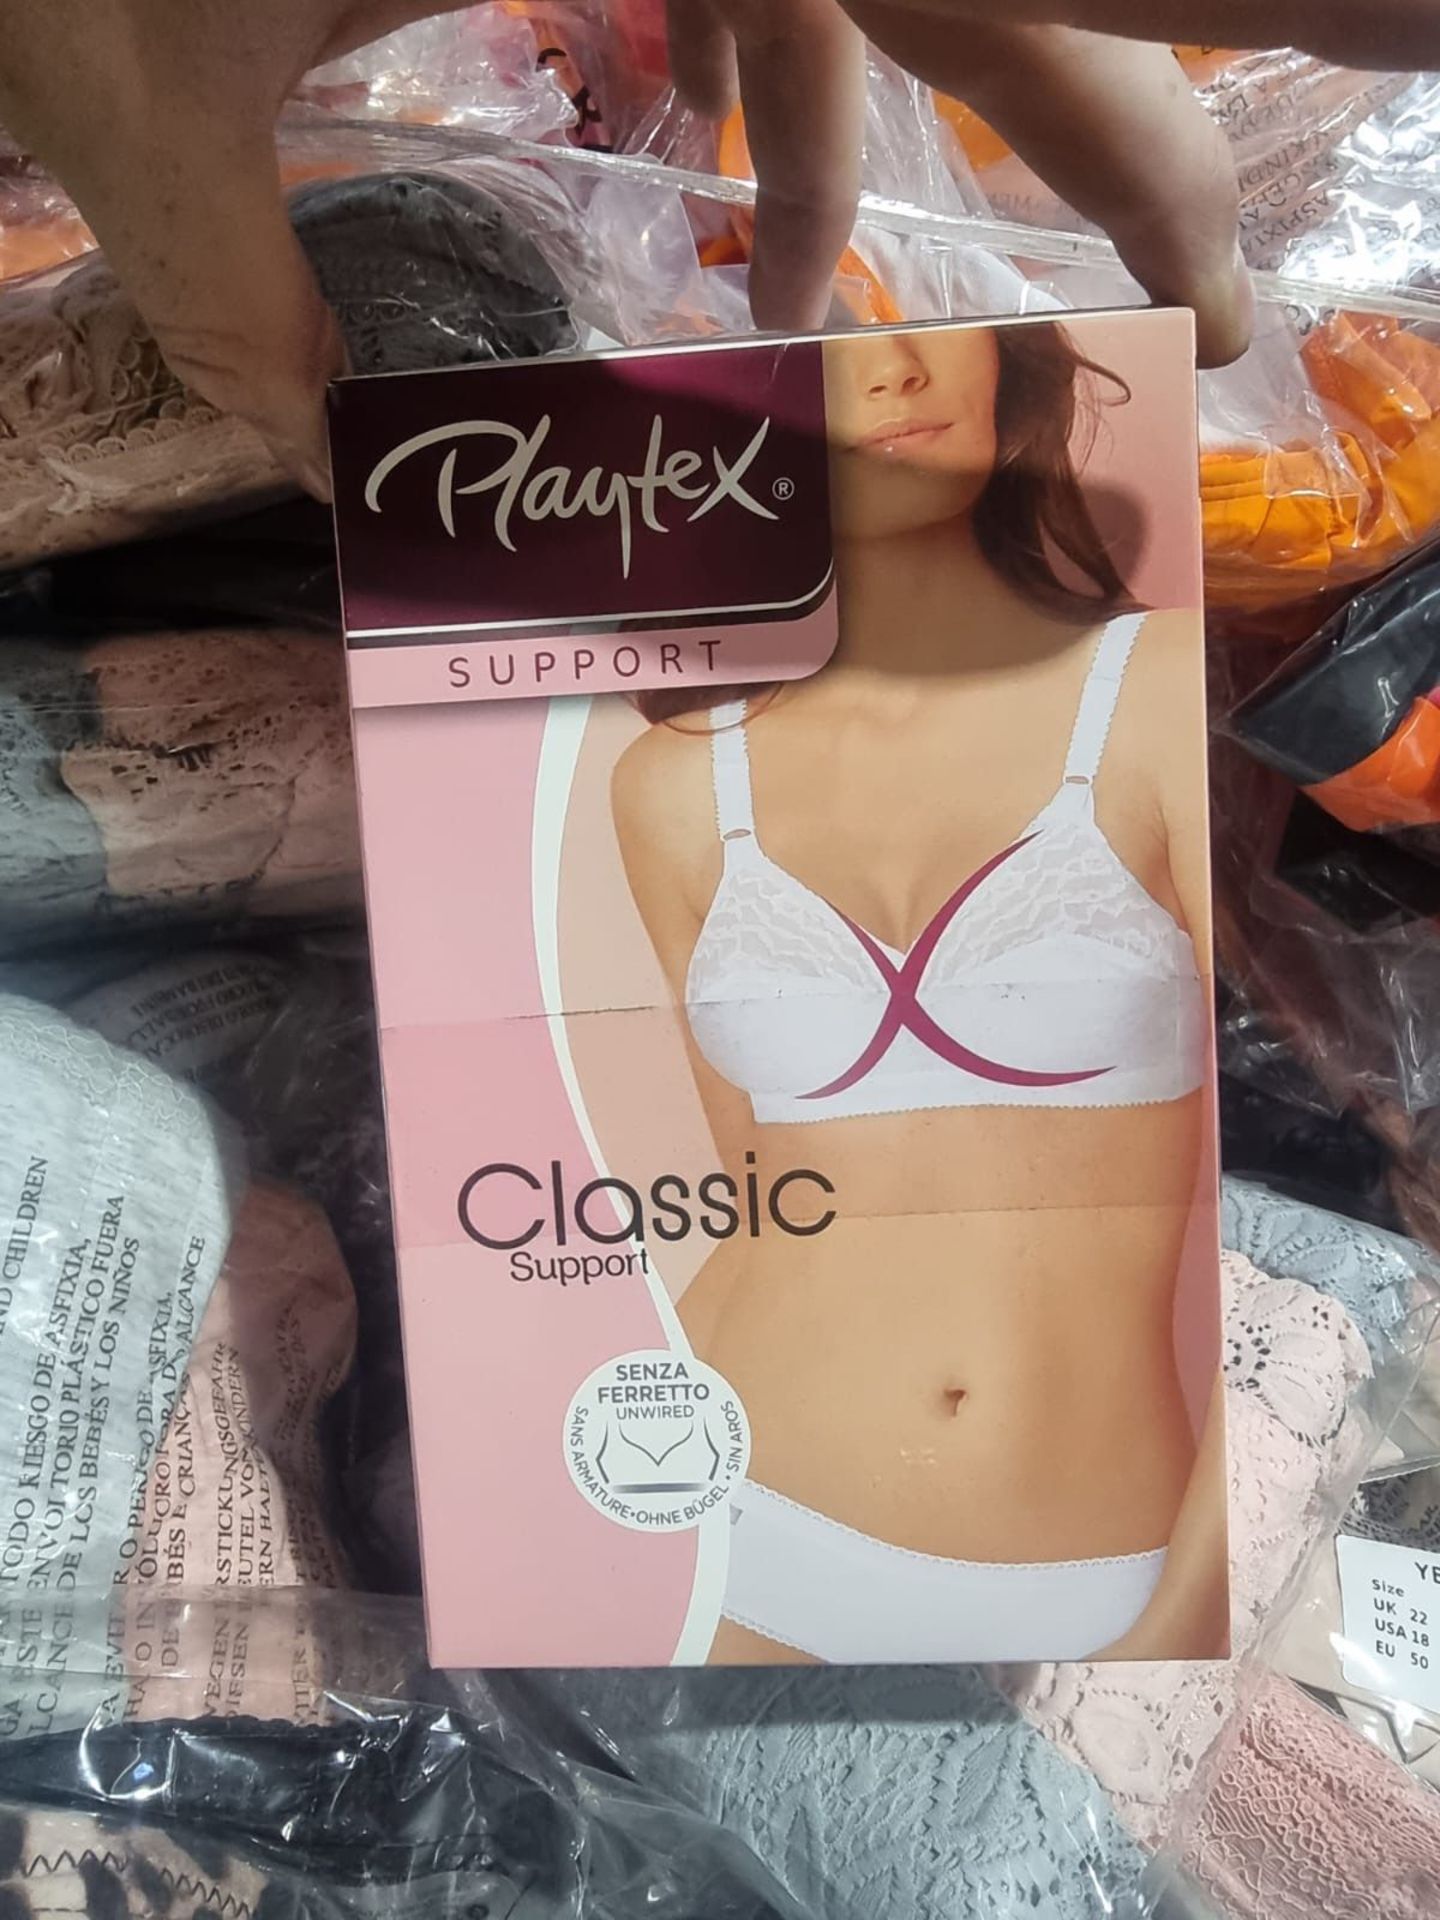 100 x NEW PACKAGED ASSORTED SWIM & UNDERWEAR FROM BRAND SUCH AS WONDERBRA, BOUX AVENUE, ANN SUMMERS, - Image 30 of 53